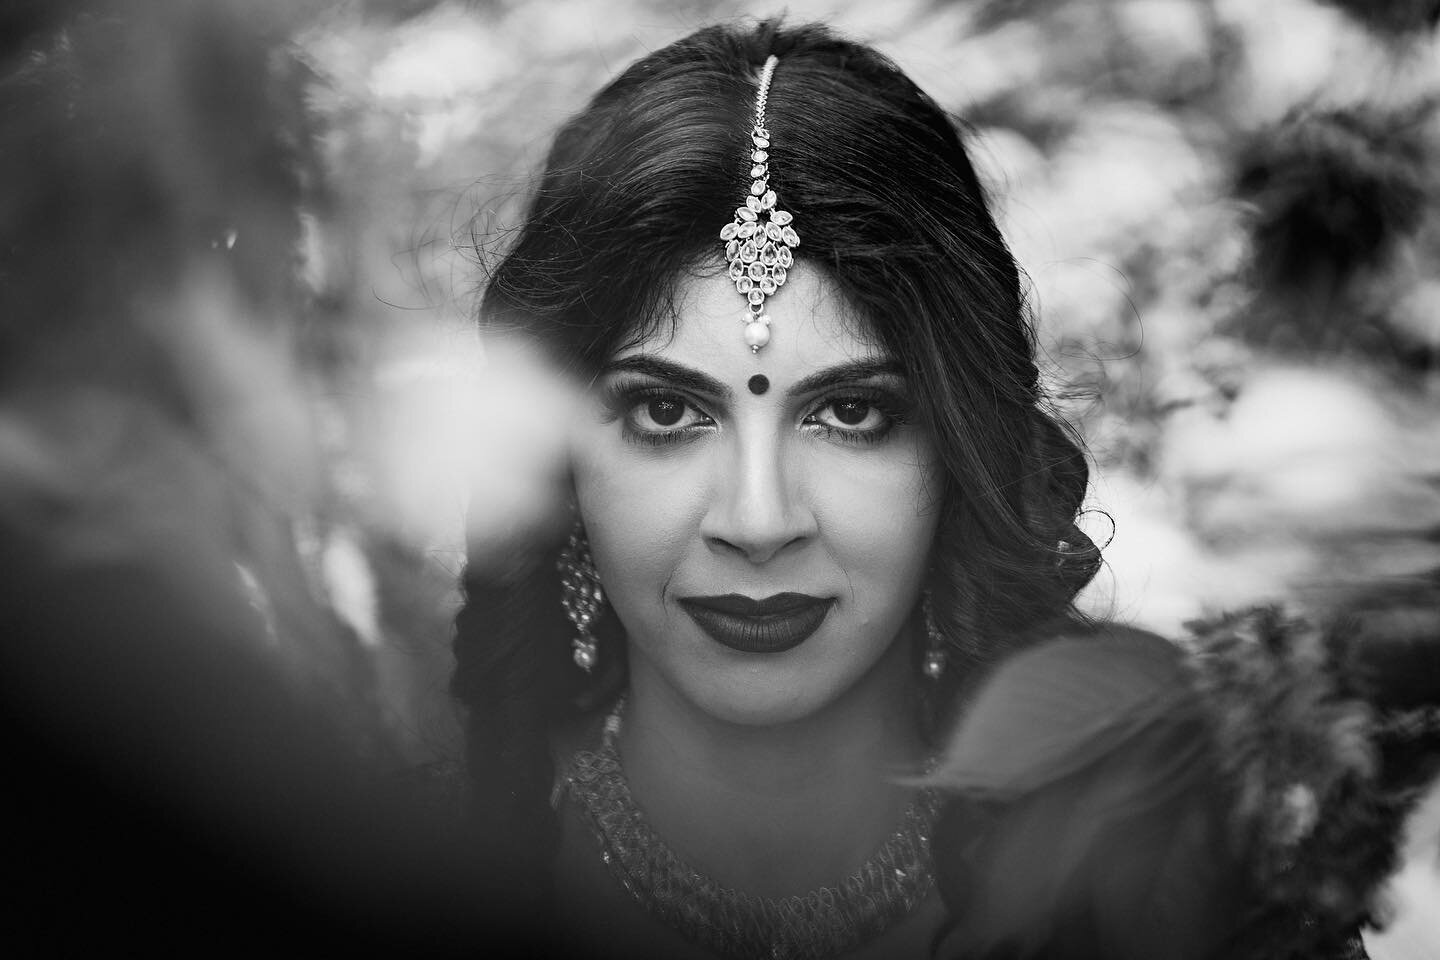 Maanasi 

Noir by Kabilan Raviraj

I absolutely love the timeless nature of this image. The eyes are speaking to you

#noir #blackandwhitephotography #bride #portraitphotography #portrait #editorial #editorialphotography #fashionphotography